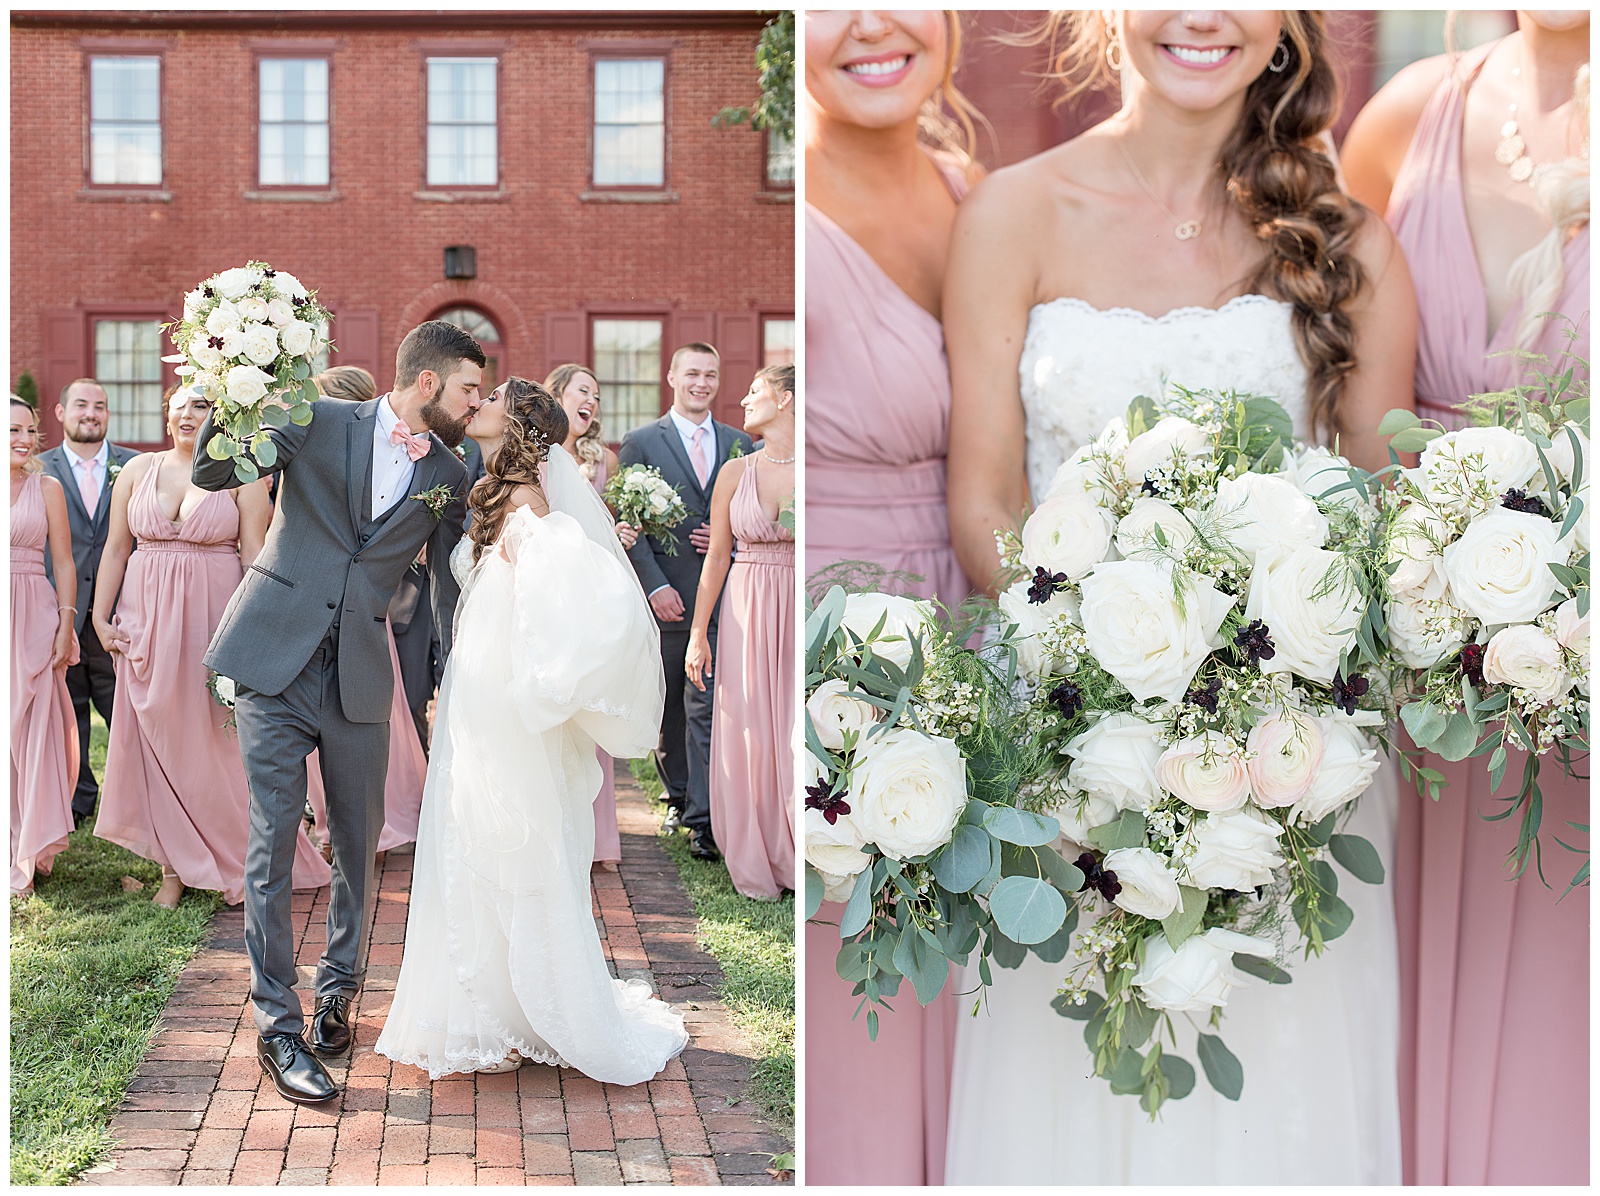 Bridal party pictures in courtyard at Country Barn